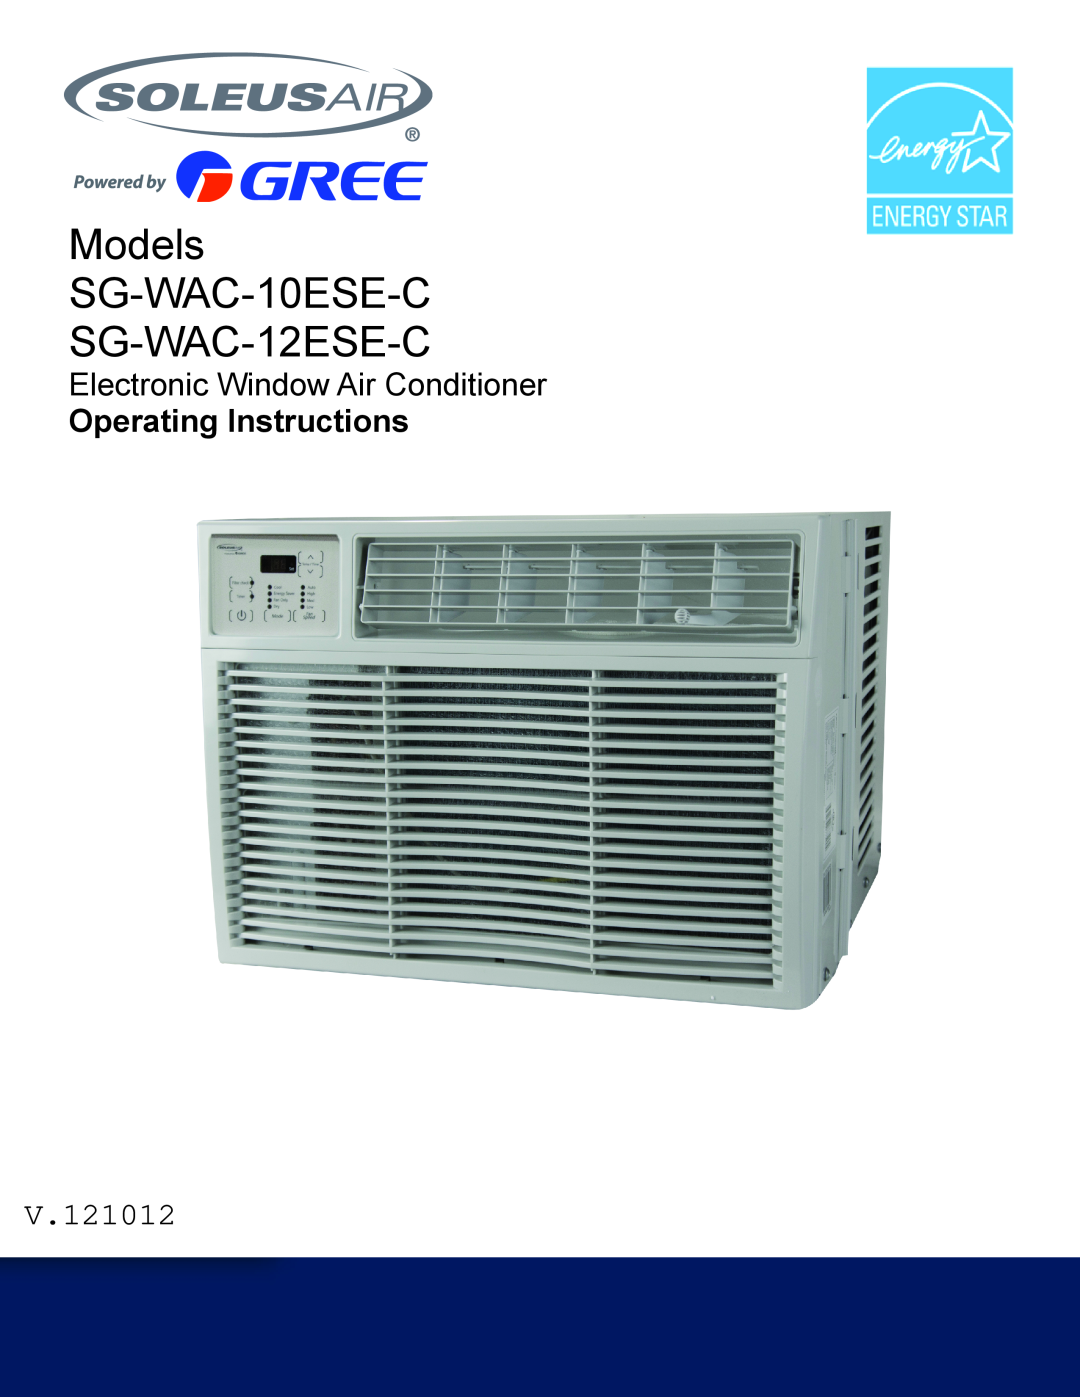 Soleus Air manual Models SG-WAC-10ESE-C SG-WAC-12ESE-C, Electronic Window Air Conditioner, Operating Instructions 